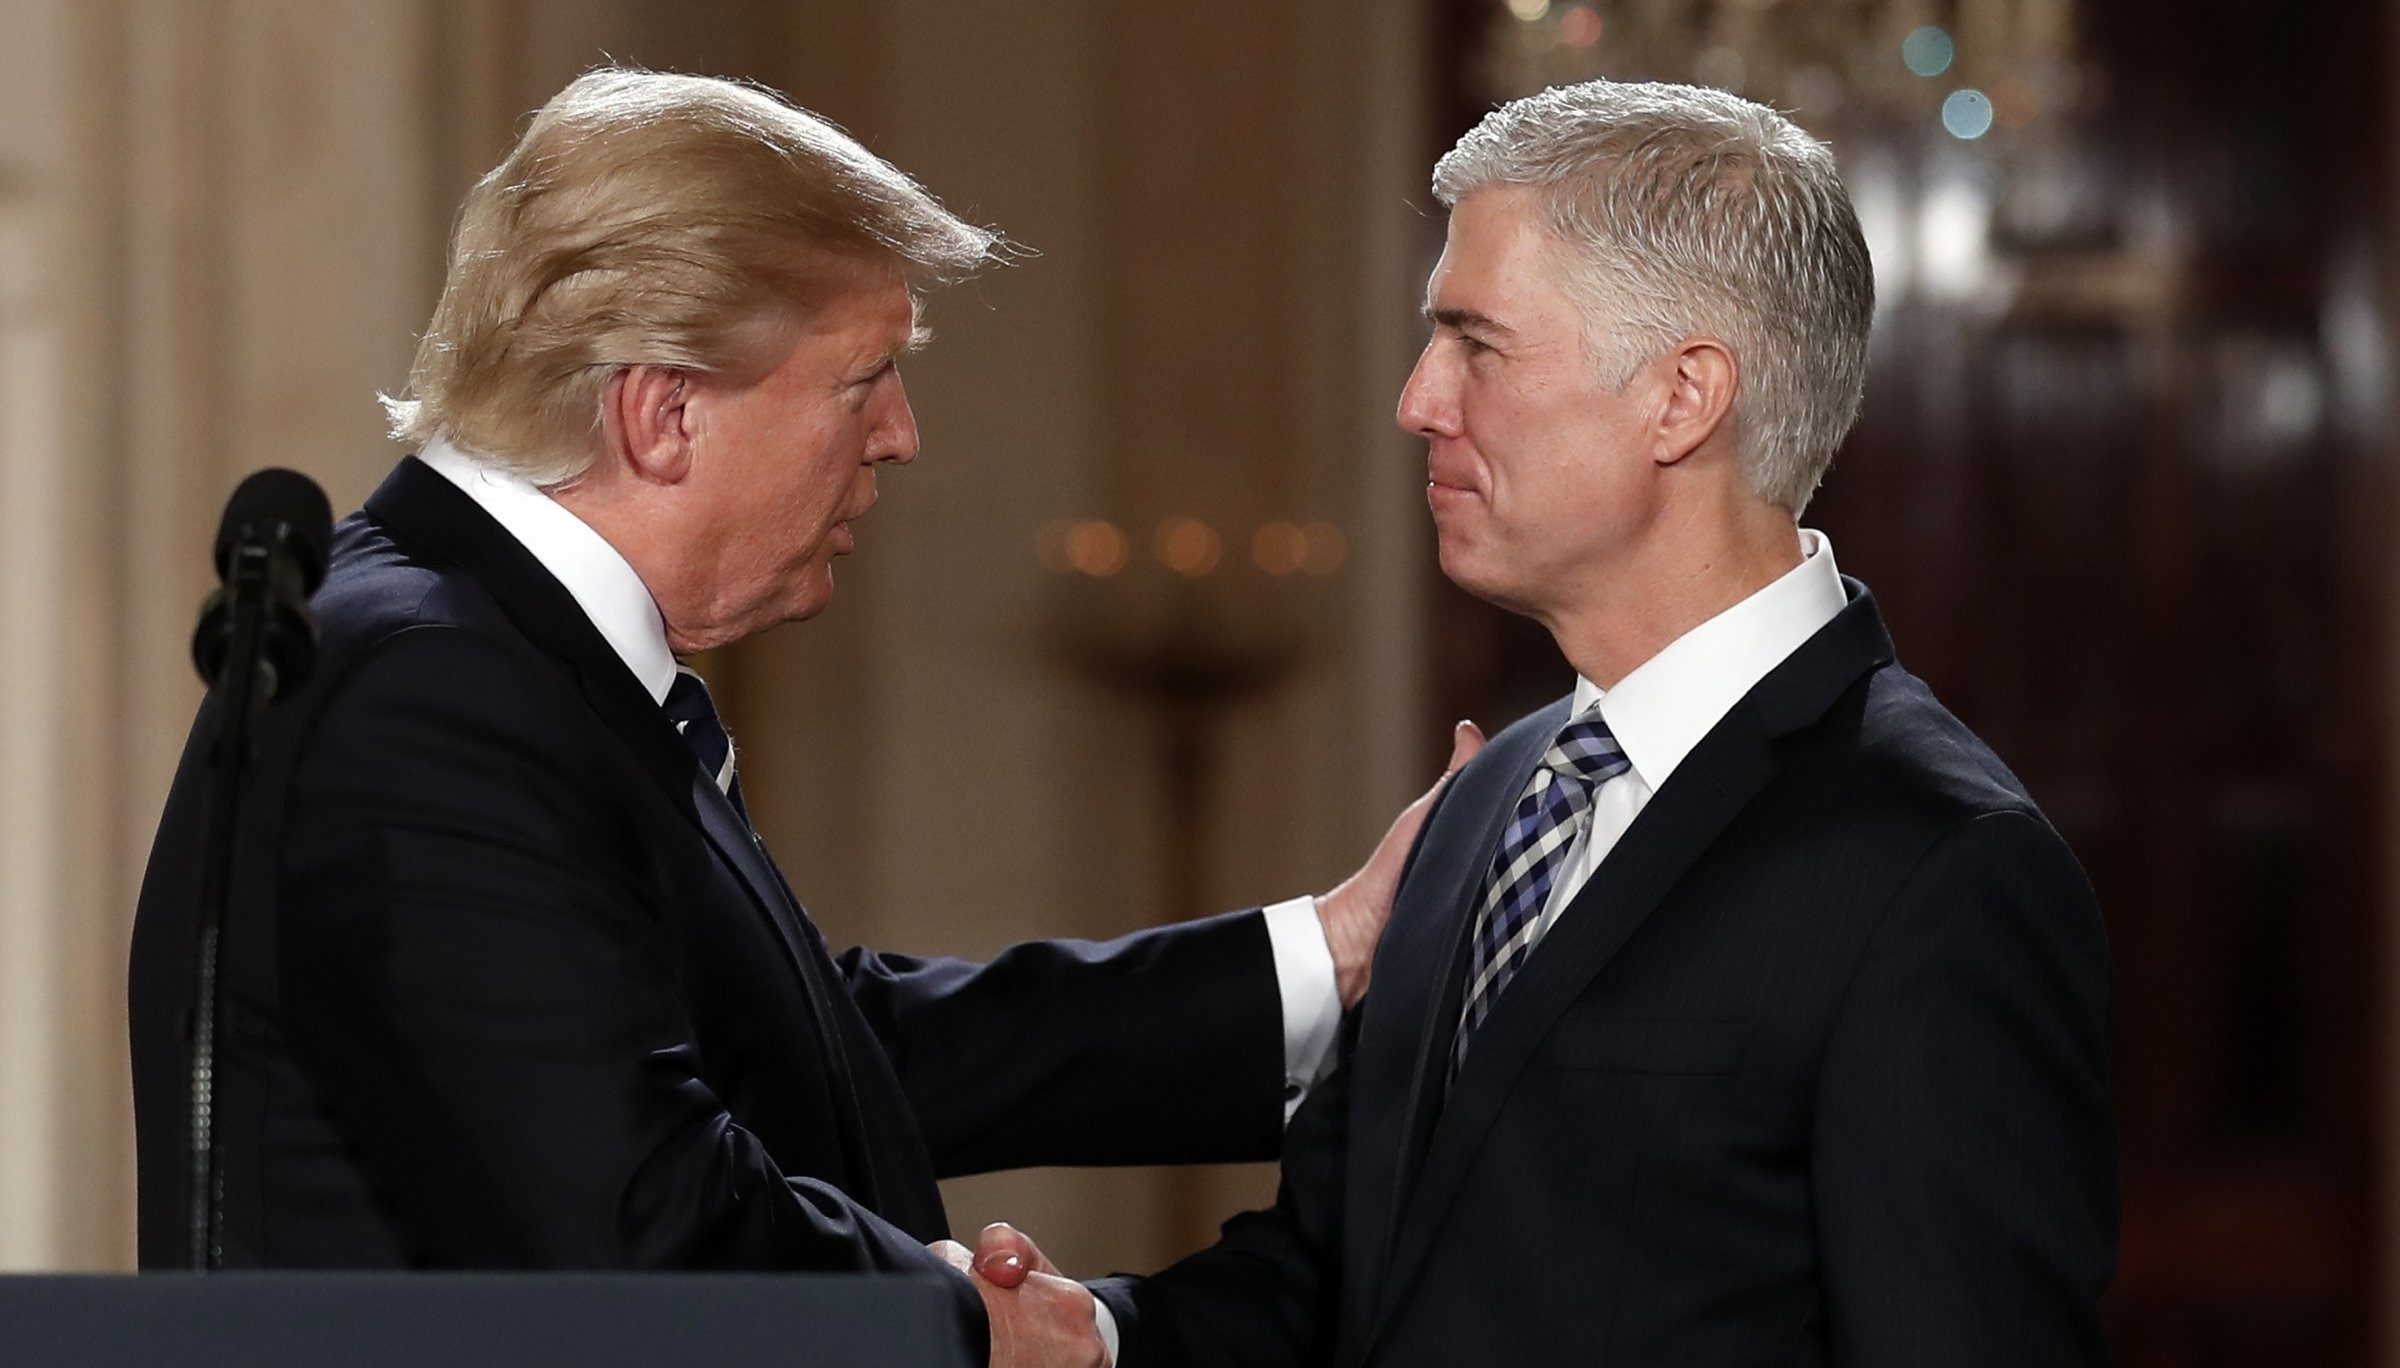 President Trump shaking hands with Judge Neil Gorsuch, his nominee to replace Justice Antonin Scalia on the Supreme Court, on January 31, 2017.